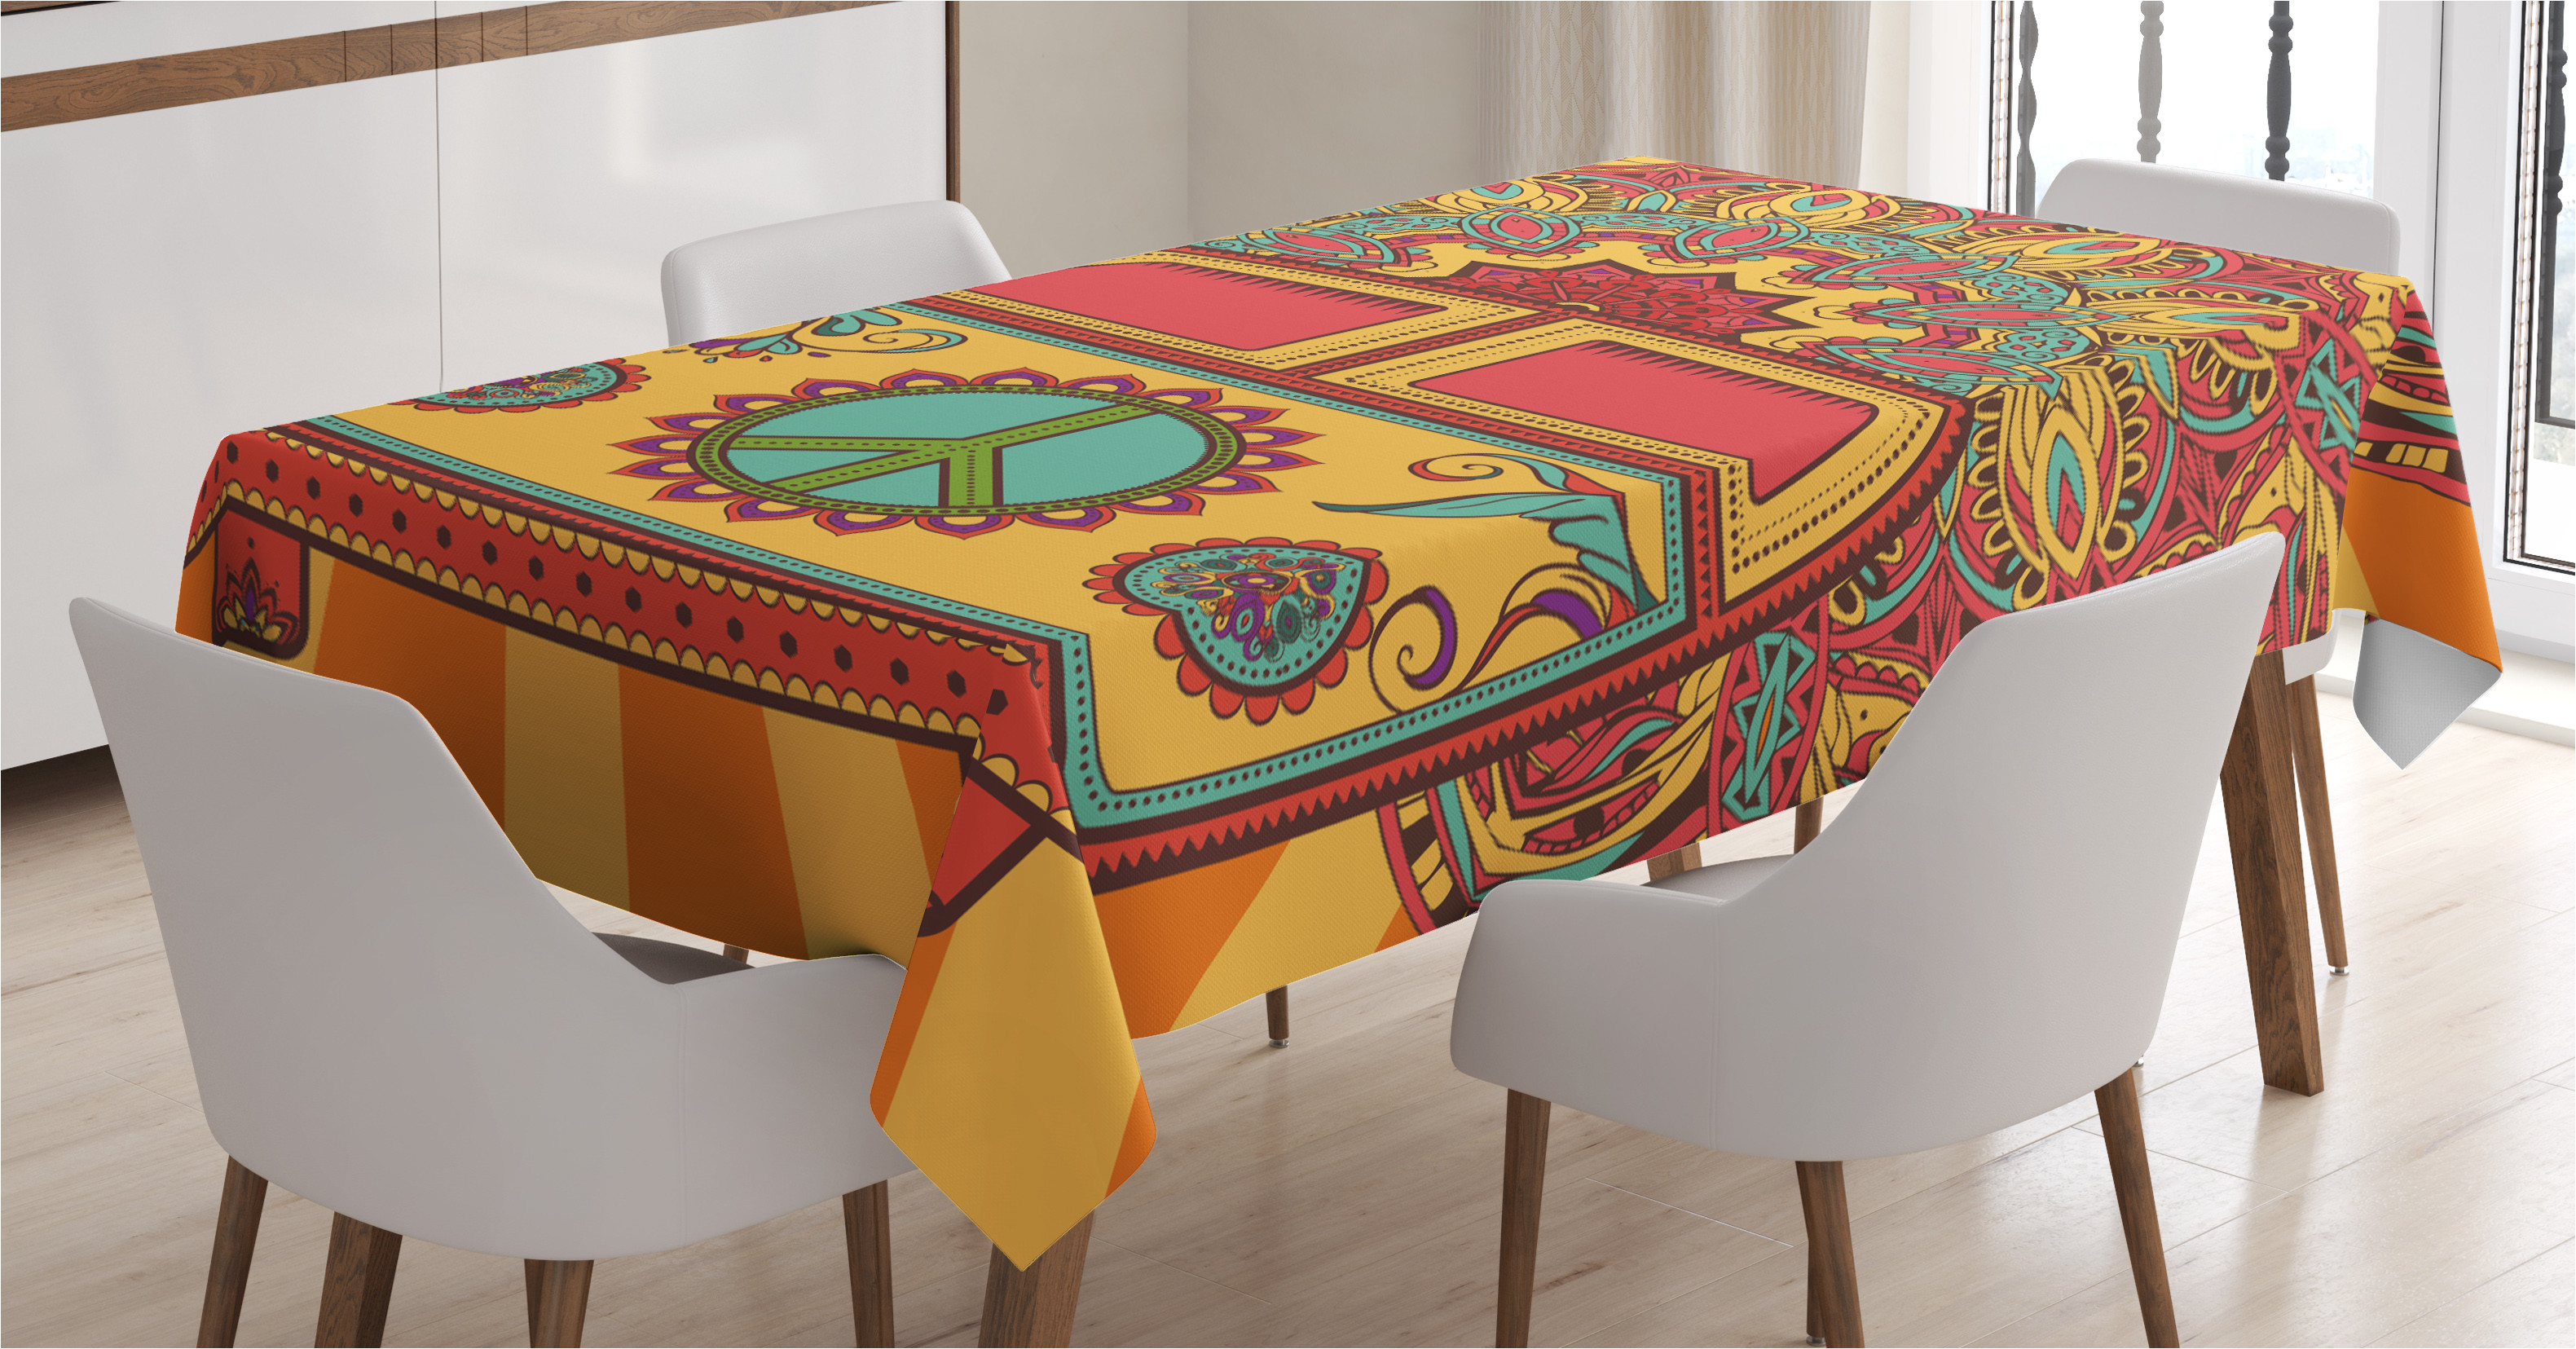 70s party decorations tablecloth hippie vintage mini van ornamental backdrop peace sign rectangular table cover for dining room kitchen 60 x 84 inches